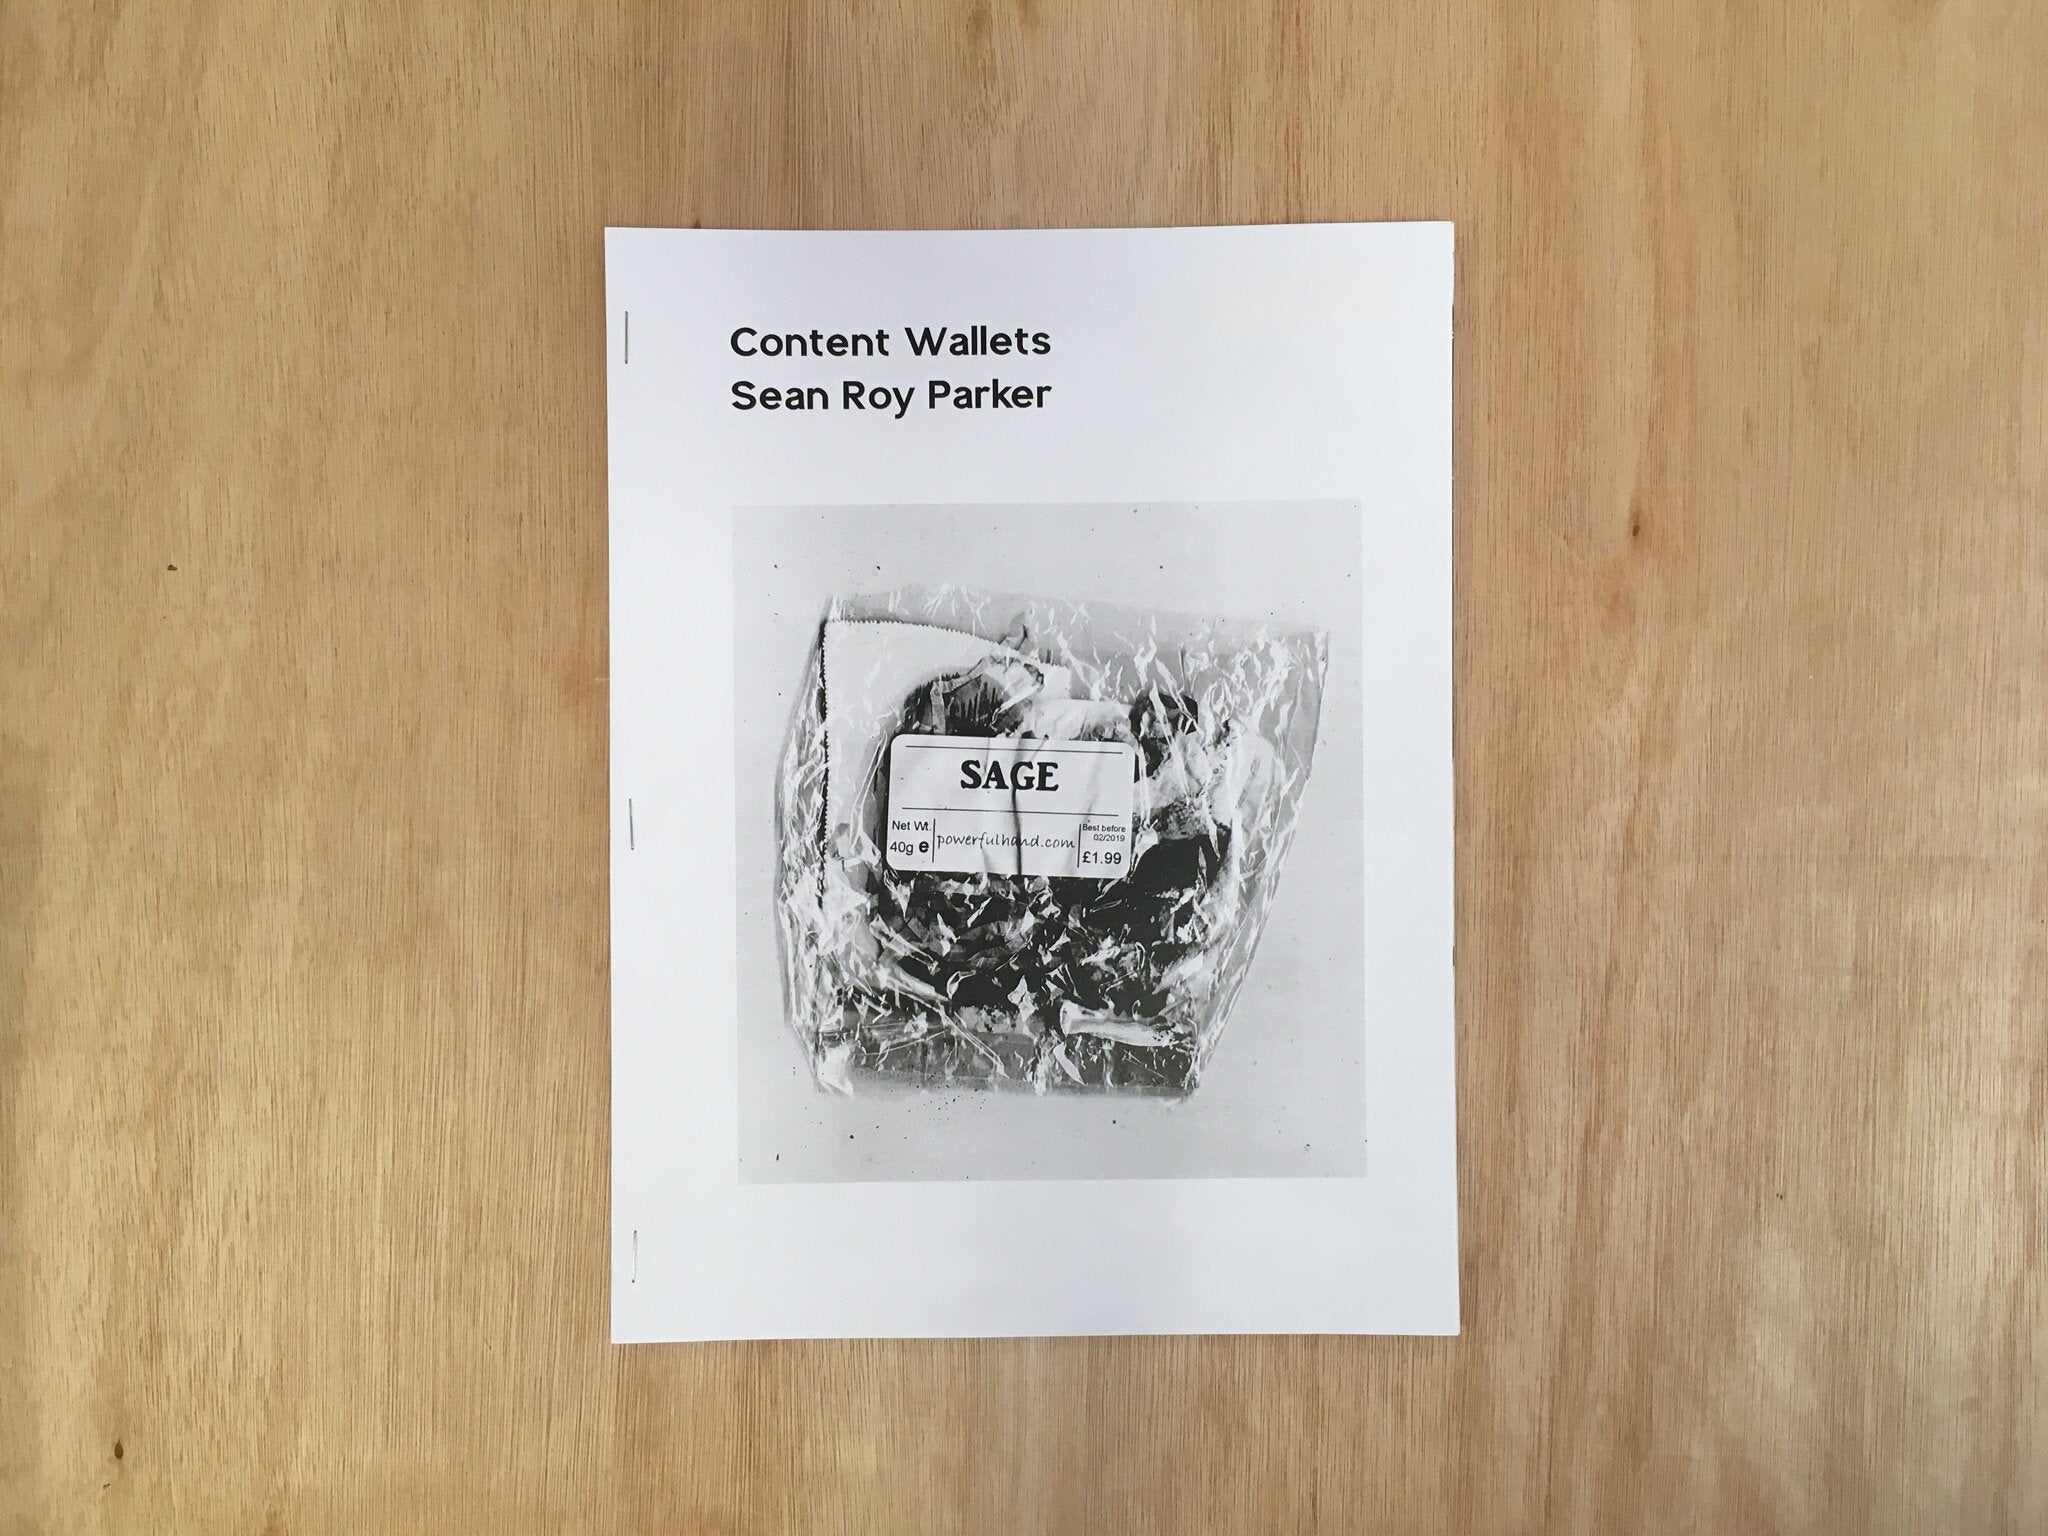 CONTENT WALLETS by Sean Roy Parker